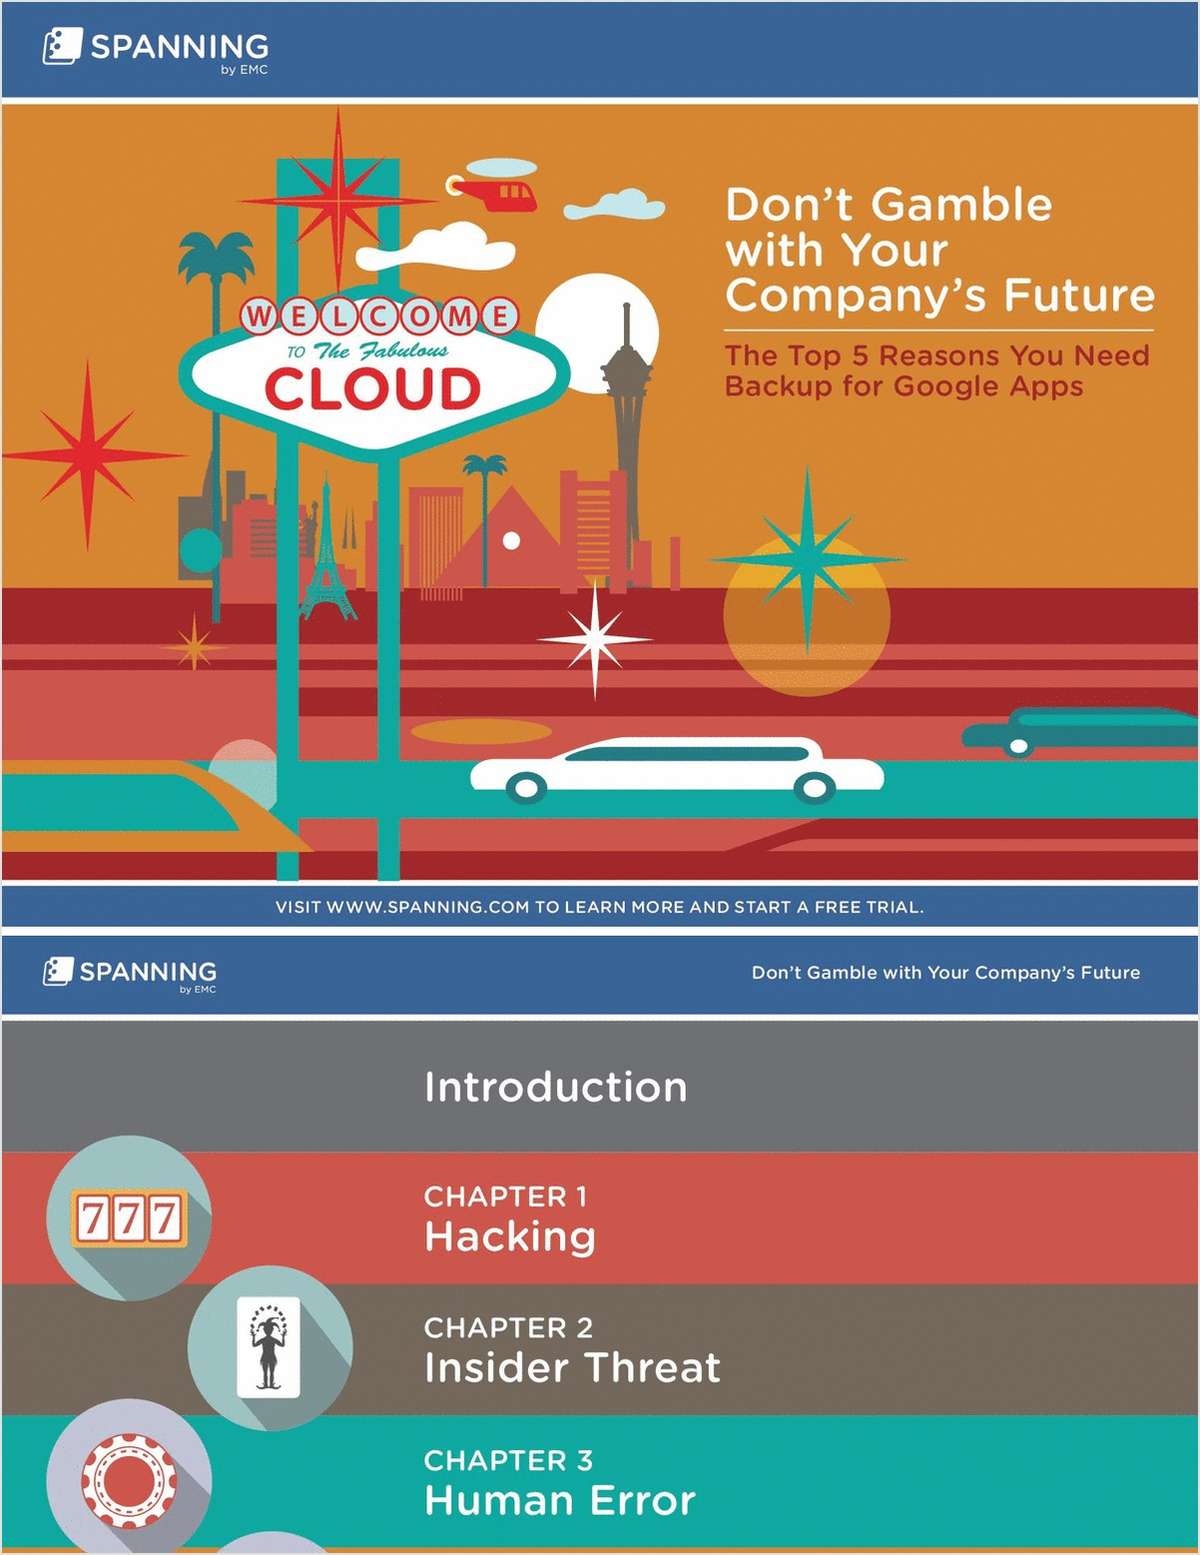 Don't Gamble with Your Company's Future: Protect Your Google Apps